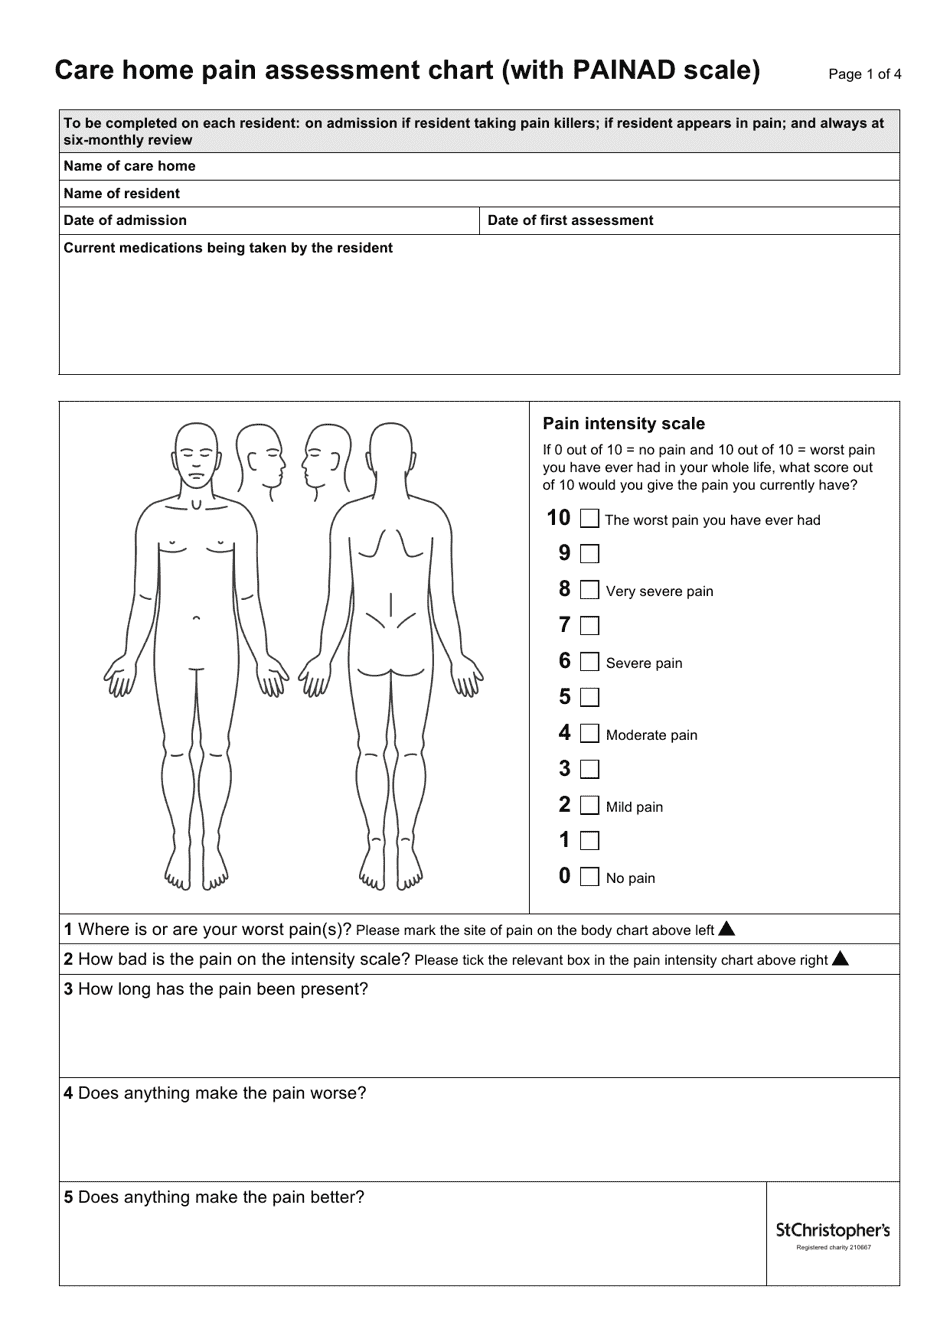 A comprehensive pain assessment chart for care homes including the Painad scale. The Painad Scale is utilized to assess pain in individuals with dementia who may have difficulty communicating their pain level effectively. This chart offers a visual tool to caregivers and healthcare professionals for accurately documenting pain levels.